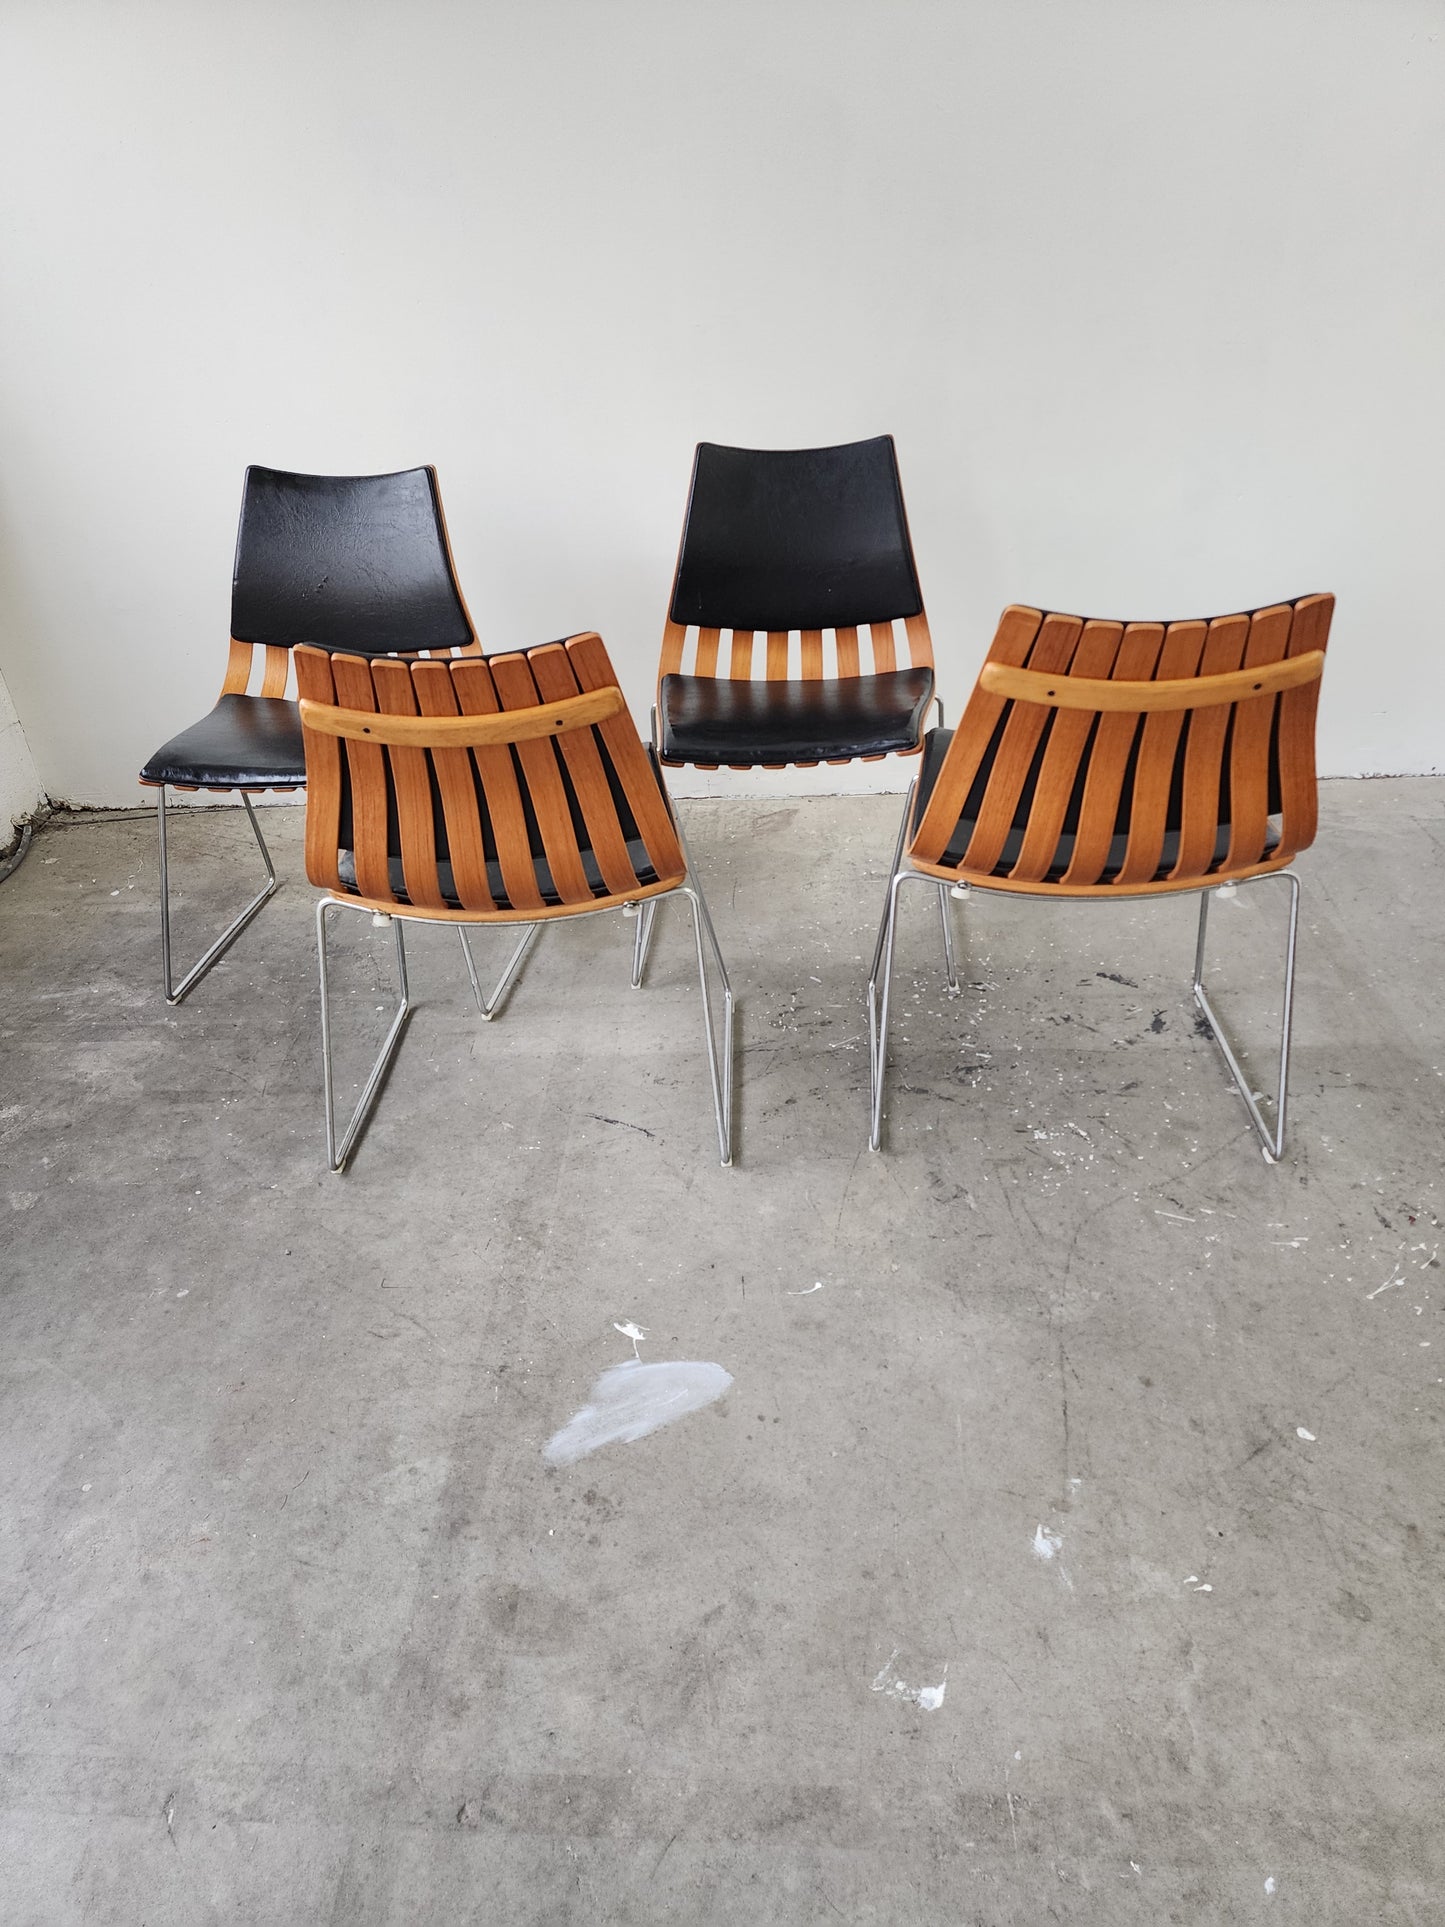 0623004 Hans Brattrud for Hove Mobler Chairs